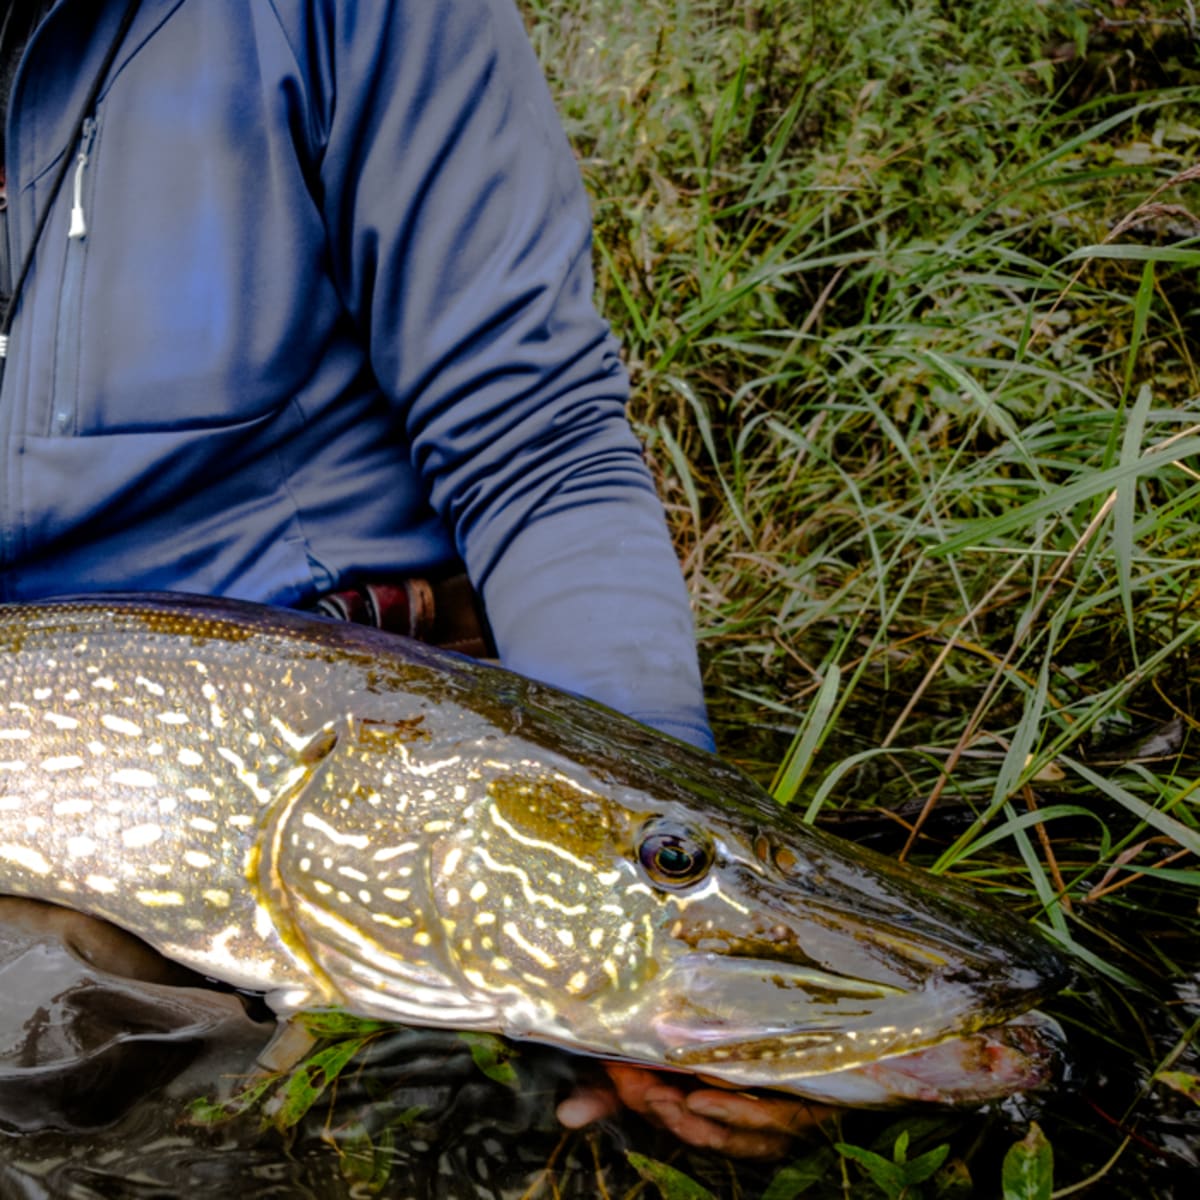 Fly Fishing for Monsters - Catching Big Pike on a Fly Rod. - Men's Journal